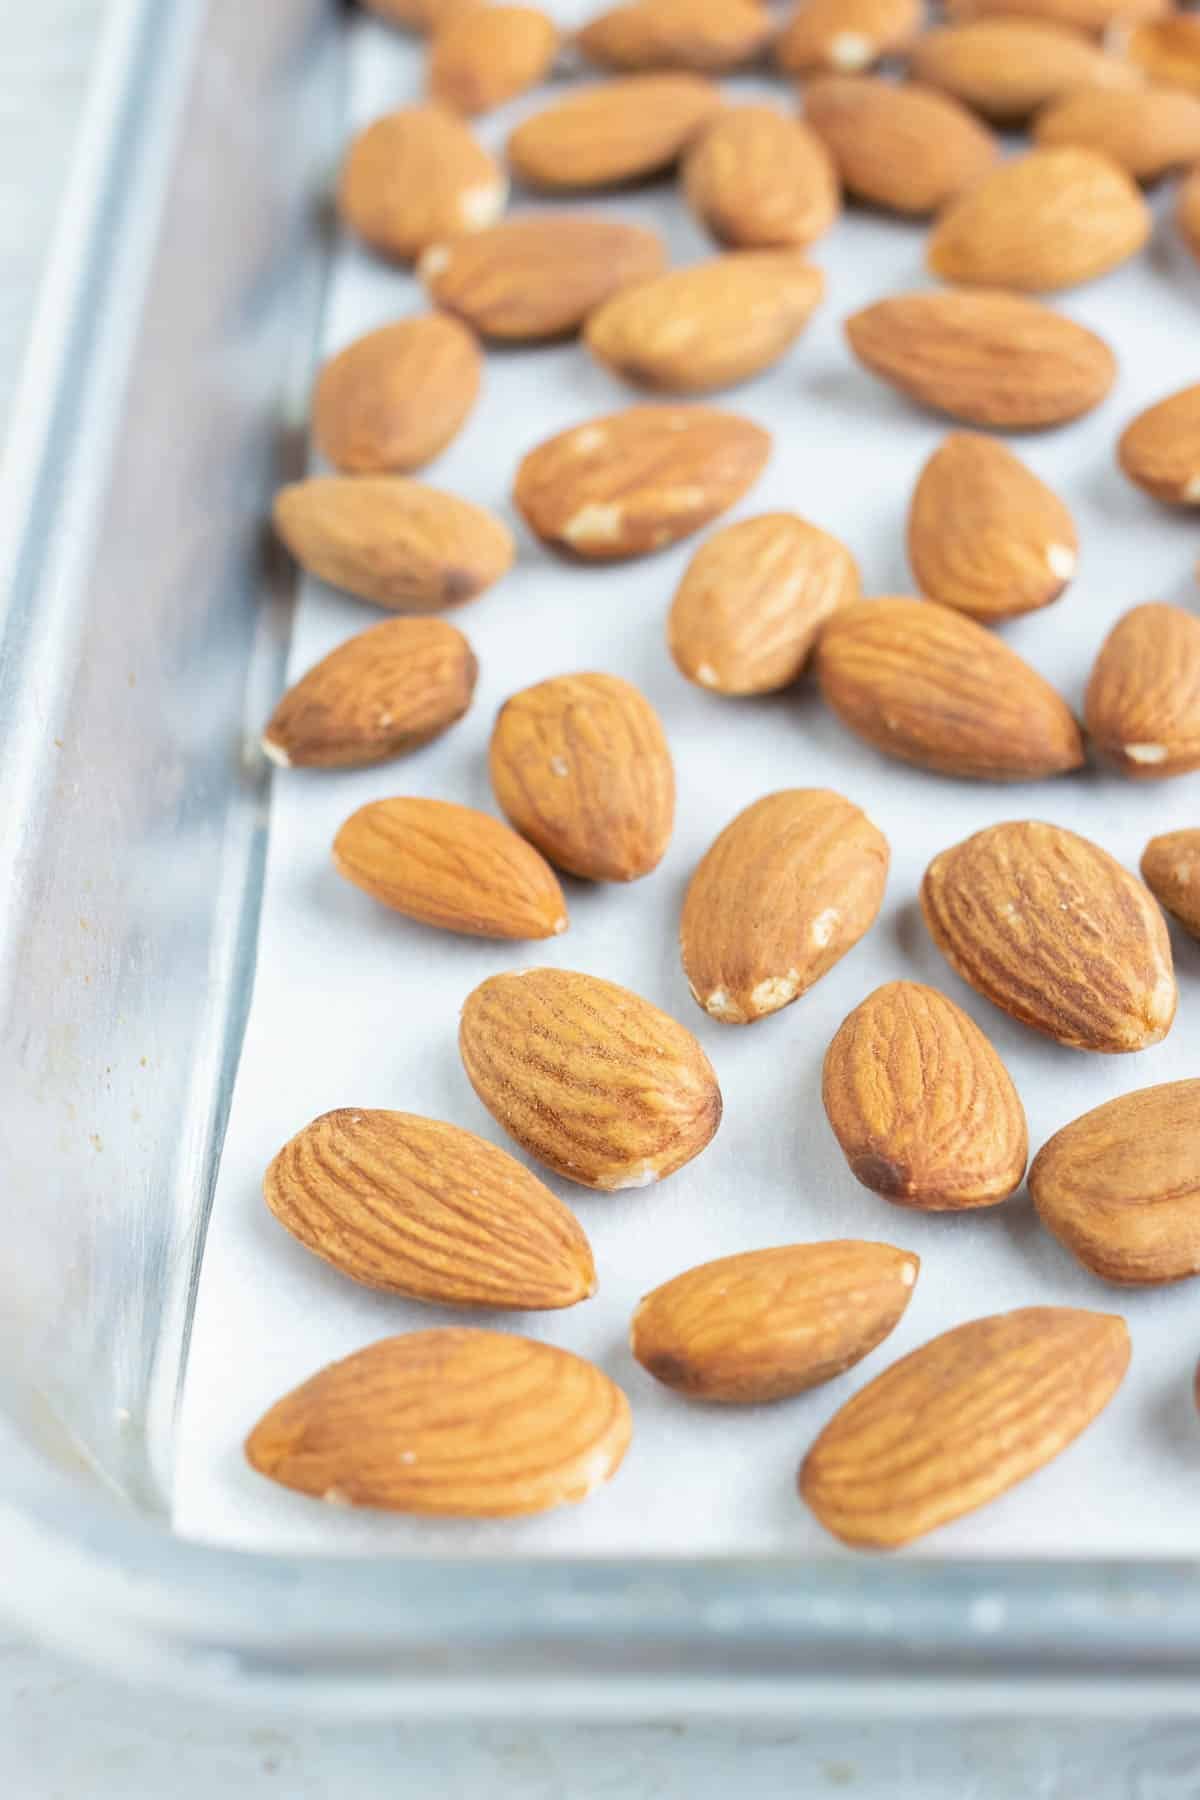 Almonds placed on a parchment paper lined baking sheet.